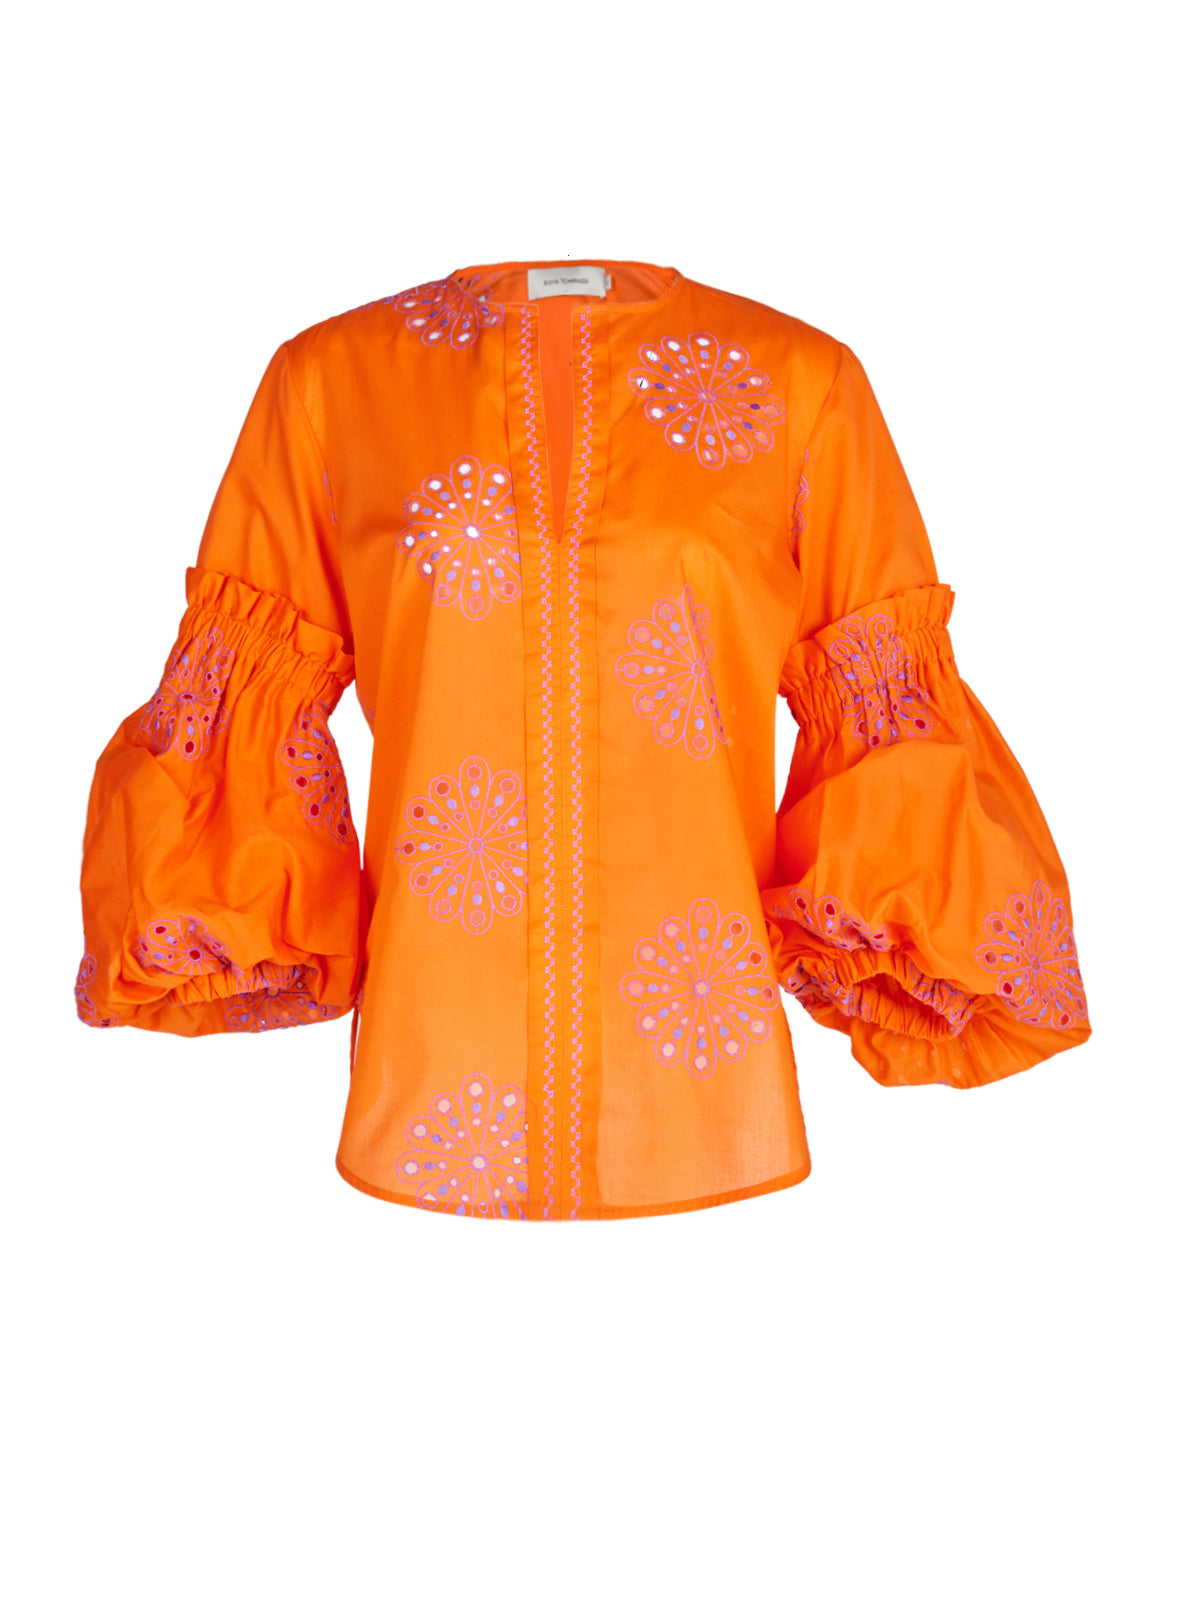 Lucaya Blouse Orange Lilac Embroidery